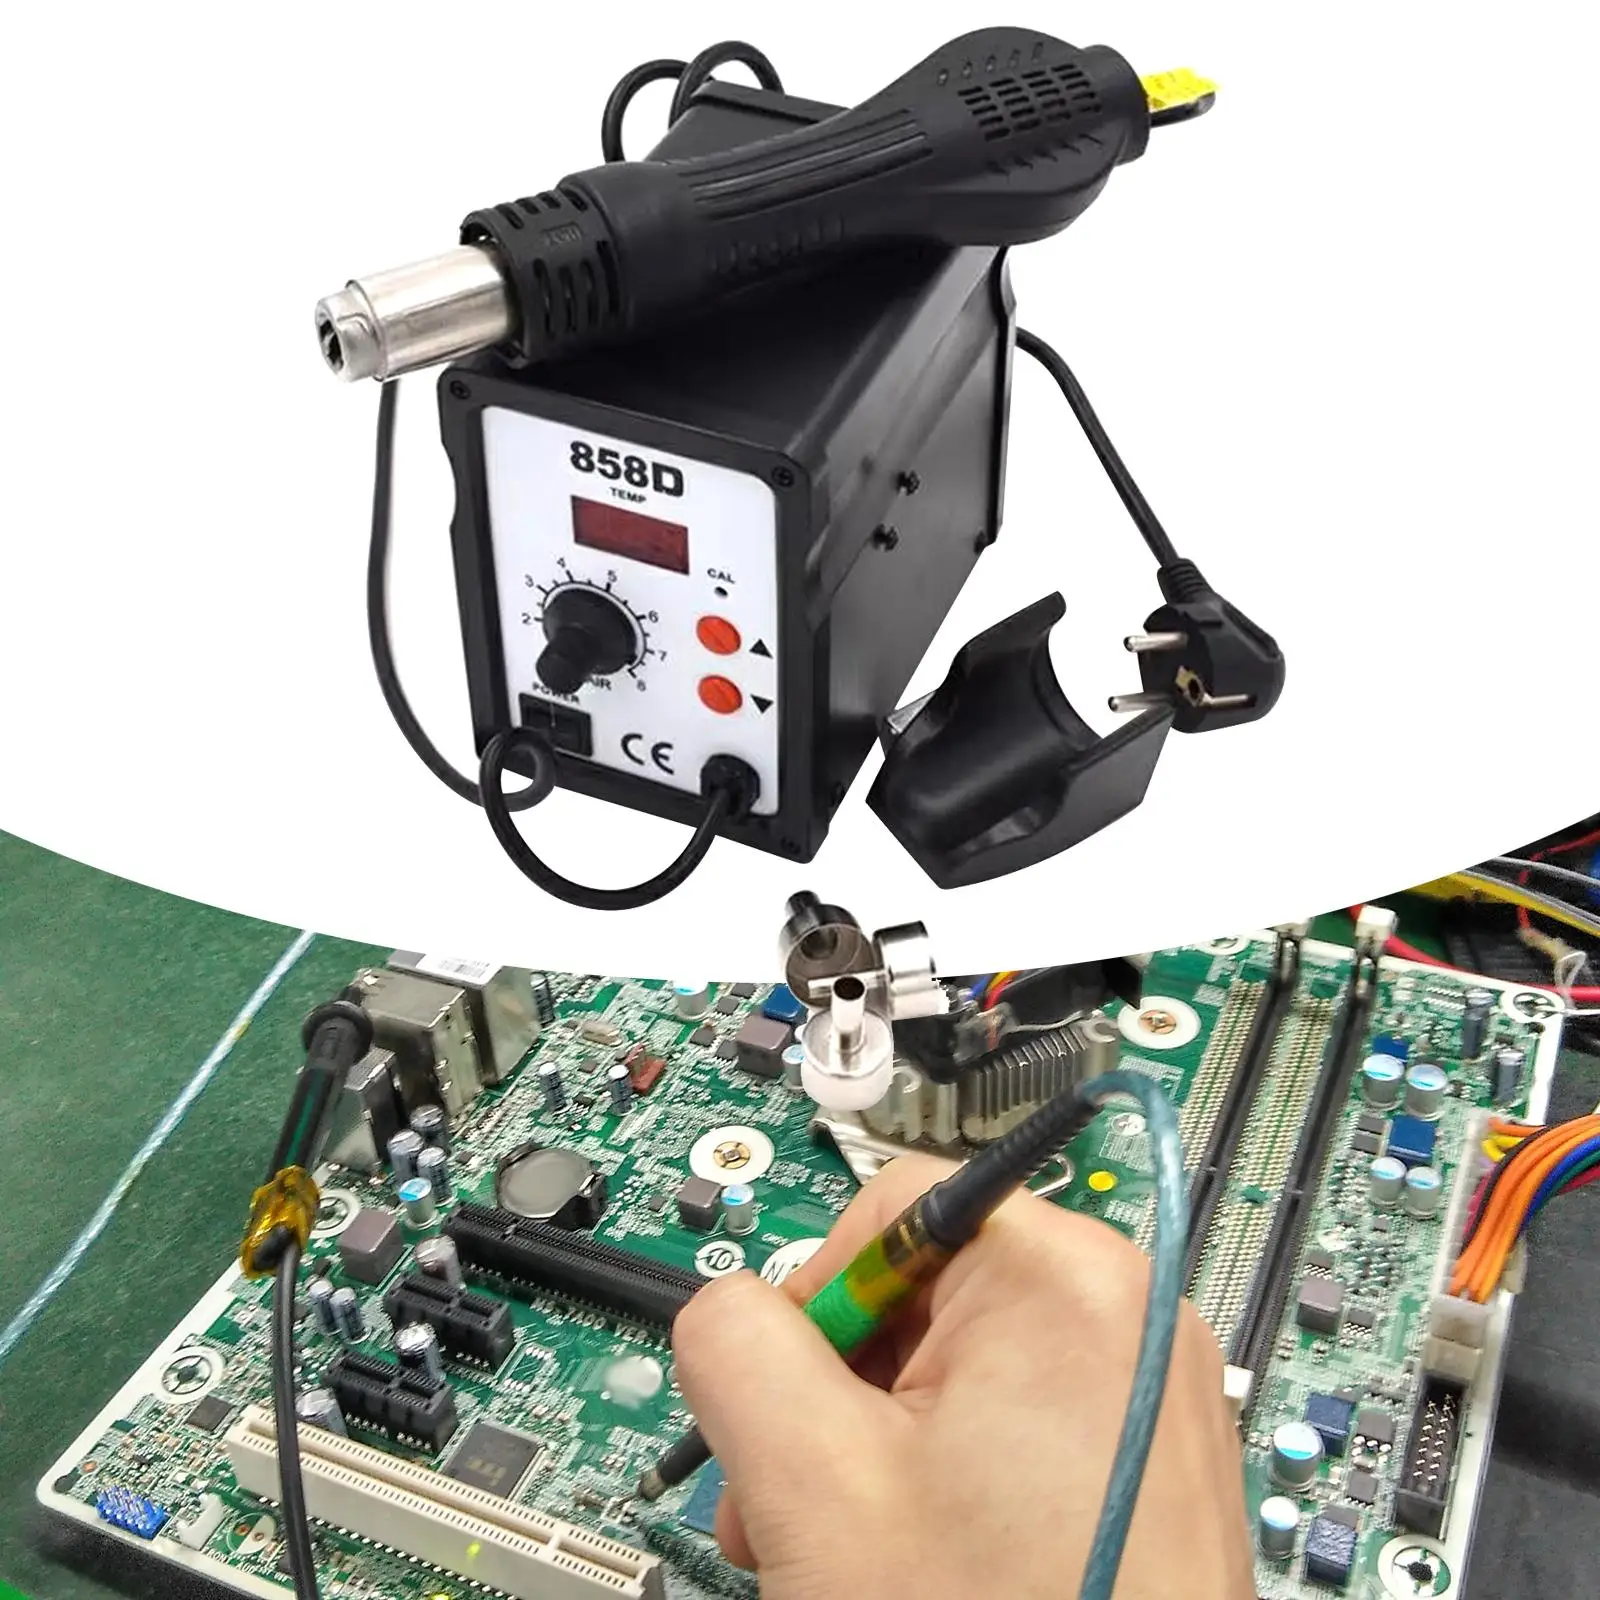 858D Hot Air Reworks Station Replacing Nozzle Professional Hot Air Reflow Adjustable Soldering for Laptop Electric Appliance